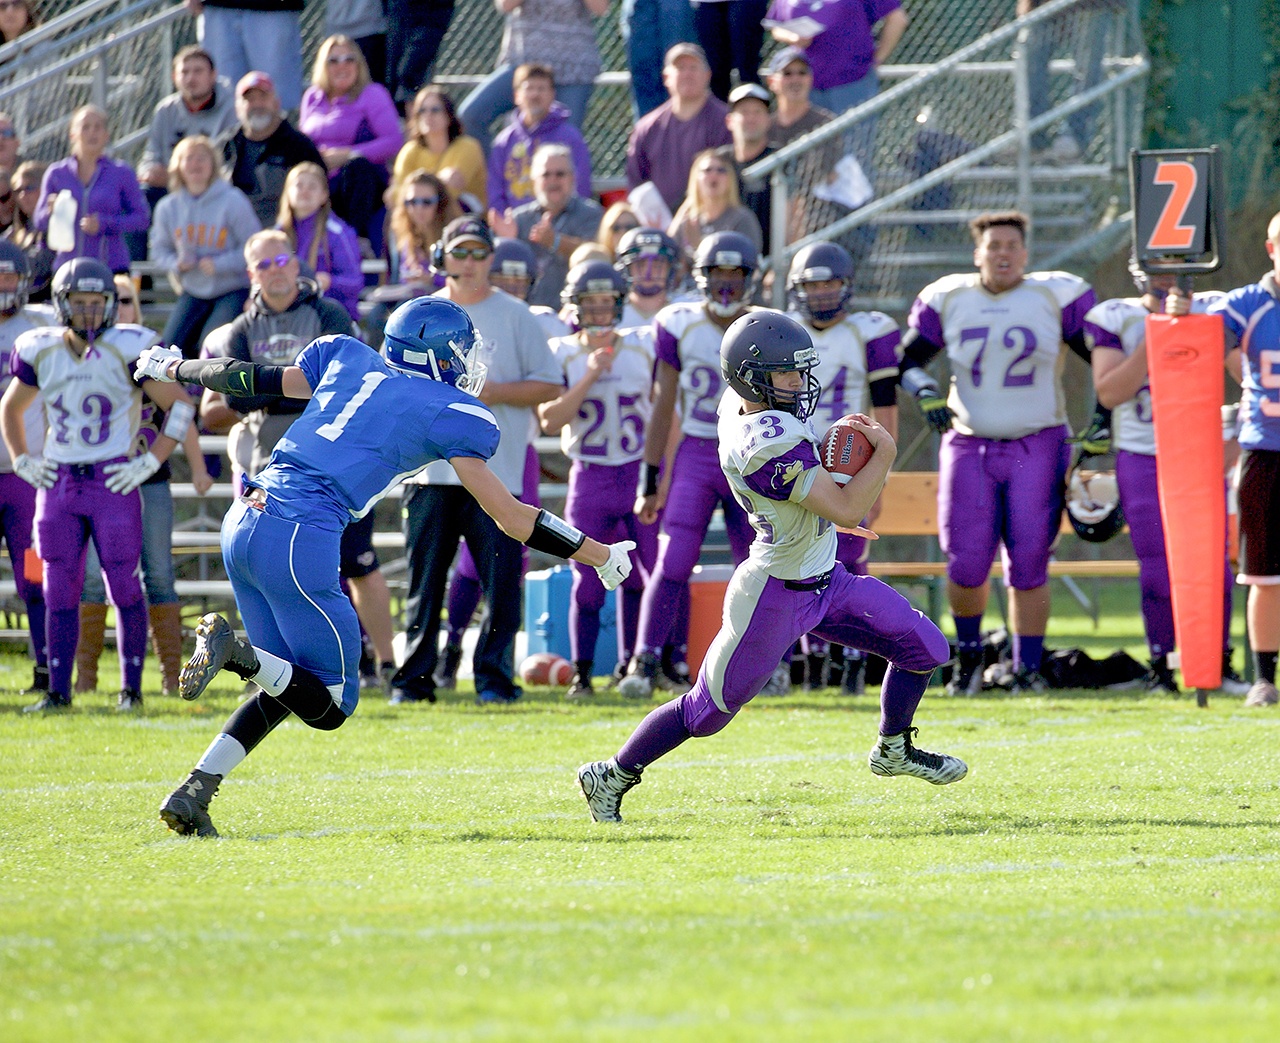 Steve Mullensky/for Peninsula Daily News Sequim’s shifty Gavin Velarde slips past a Chimacum player during a 2015 game.